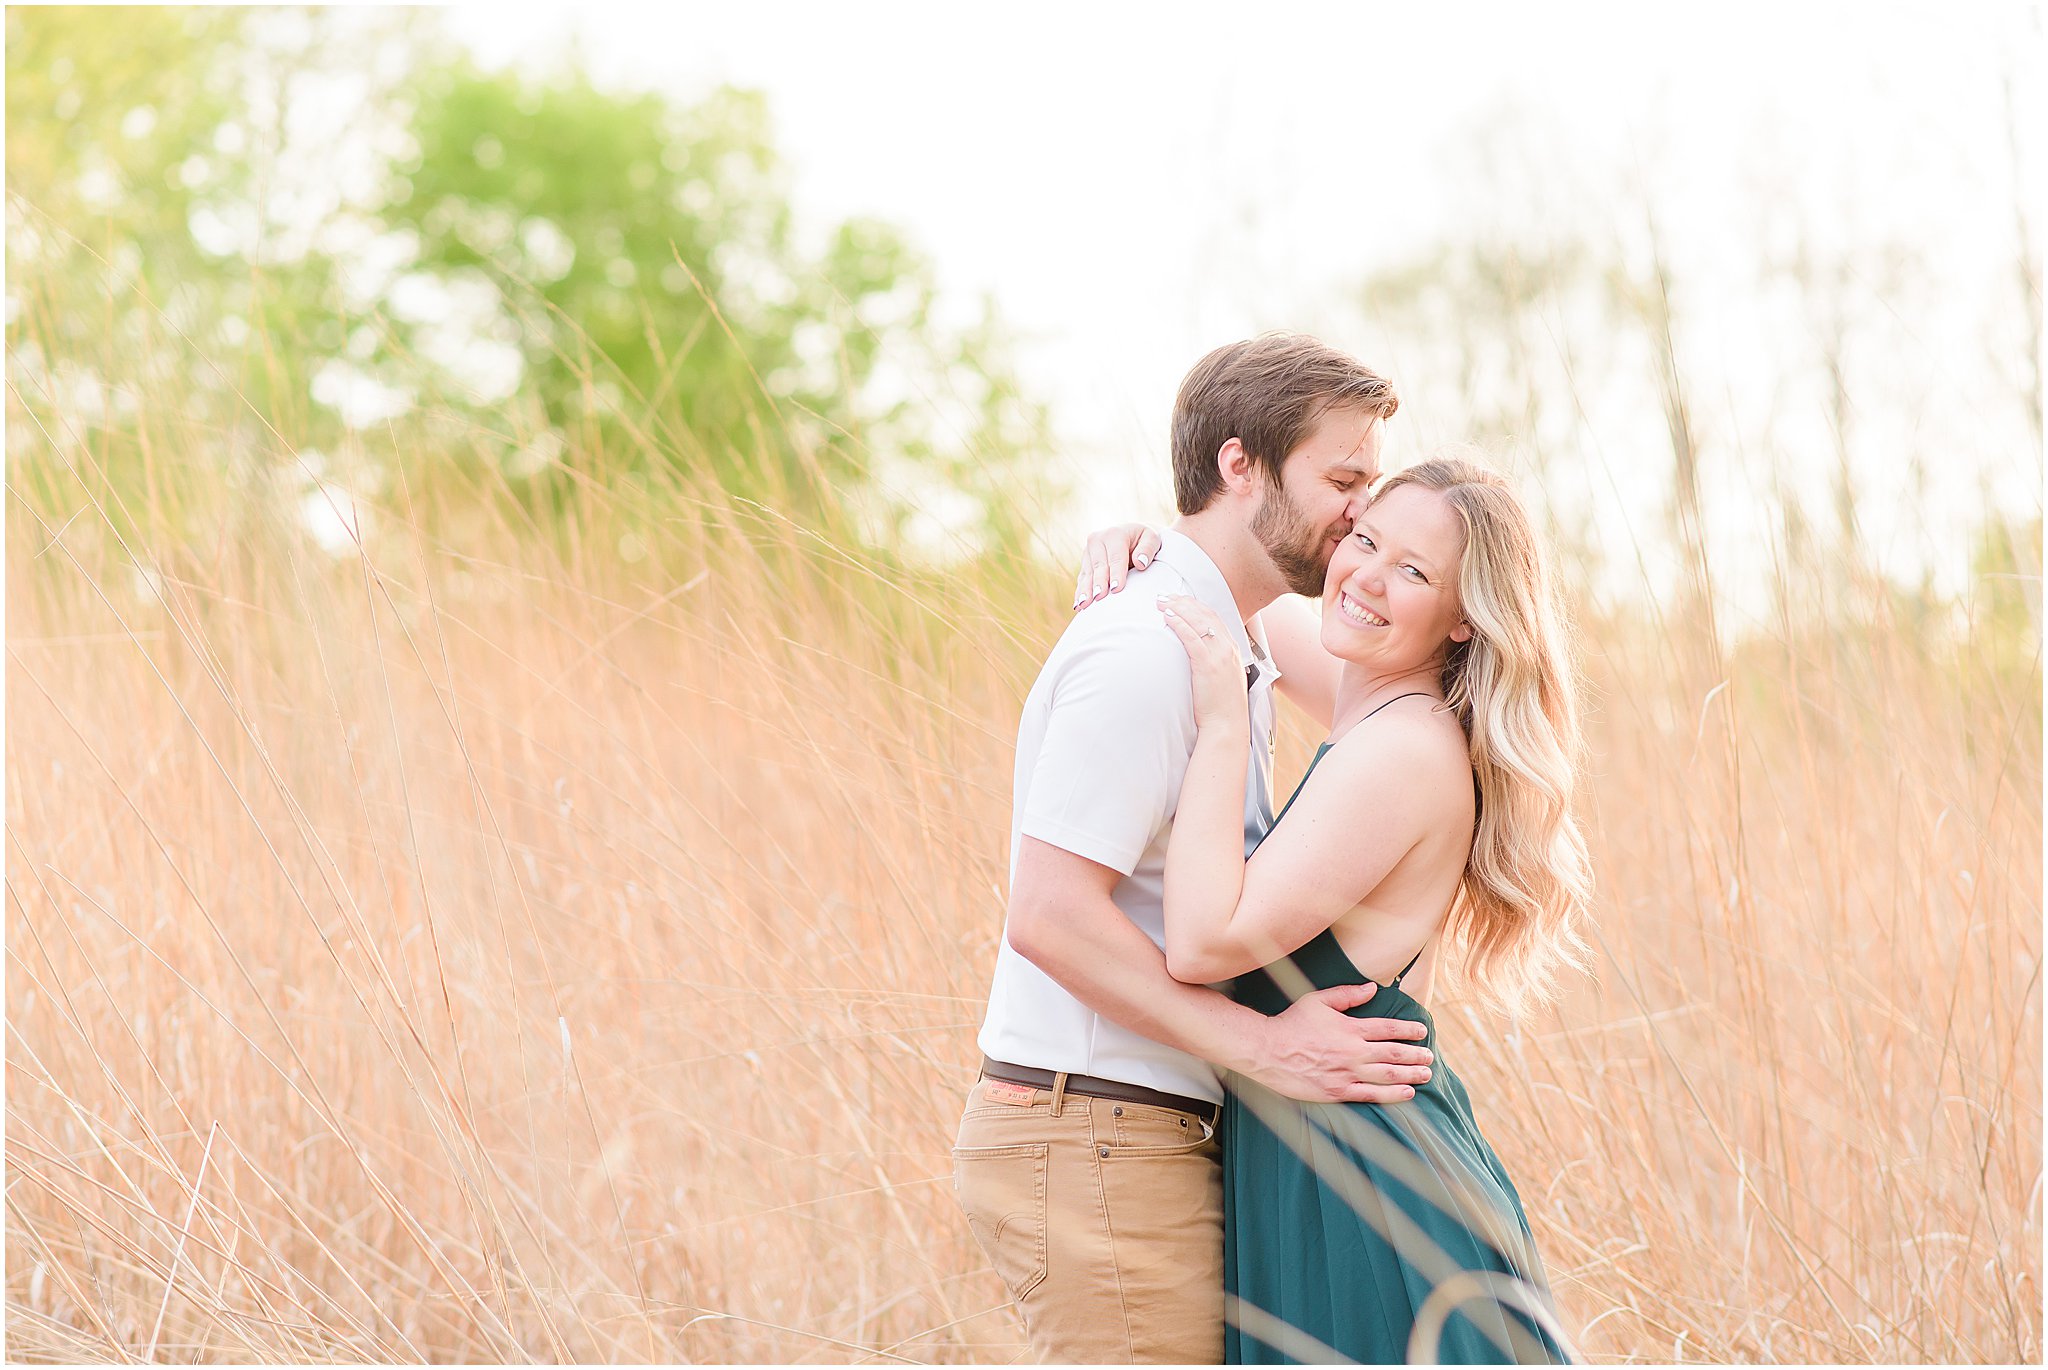 Guy kissing girl on cheek during Eagle Creek Park Engagement Session